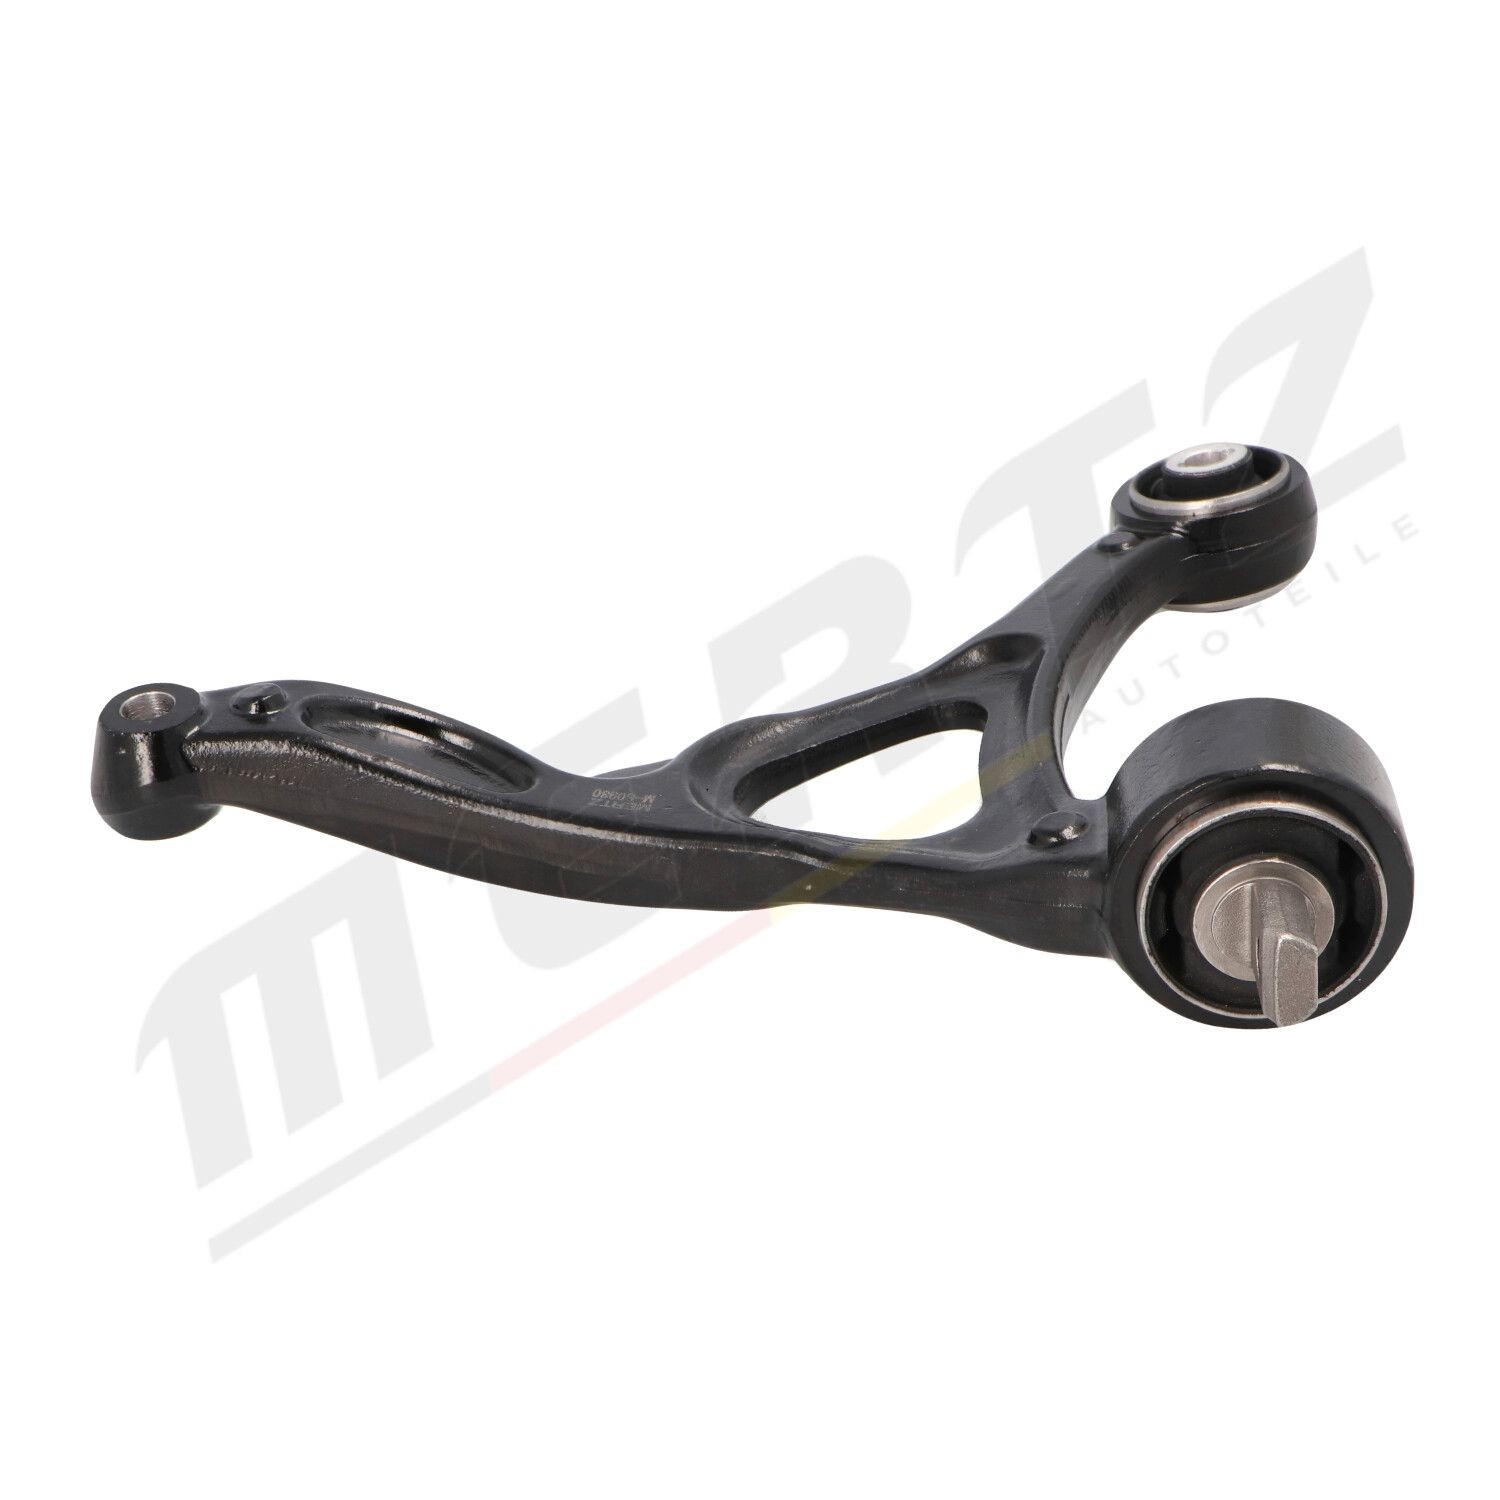 MS0930 Track control arm MERTZ M-S0930 review and test